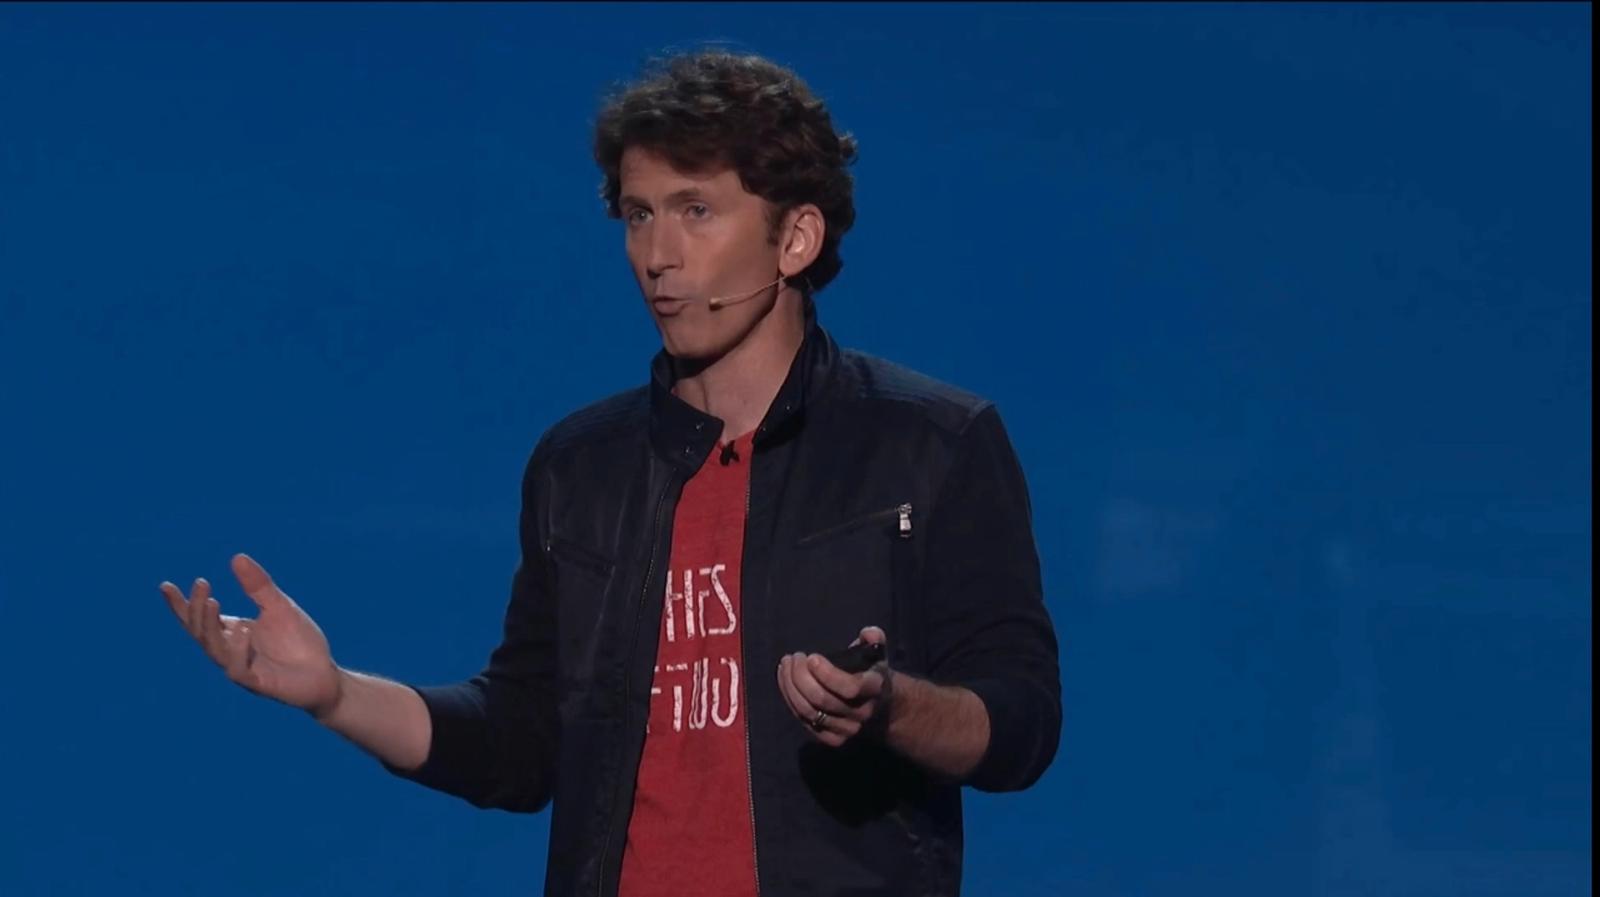 Todd Howard on stage at E3